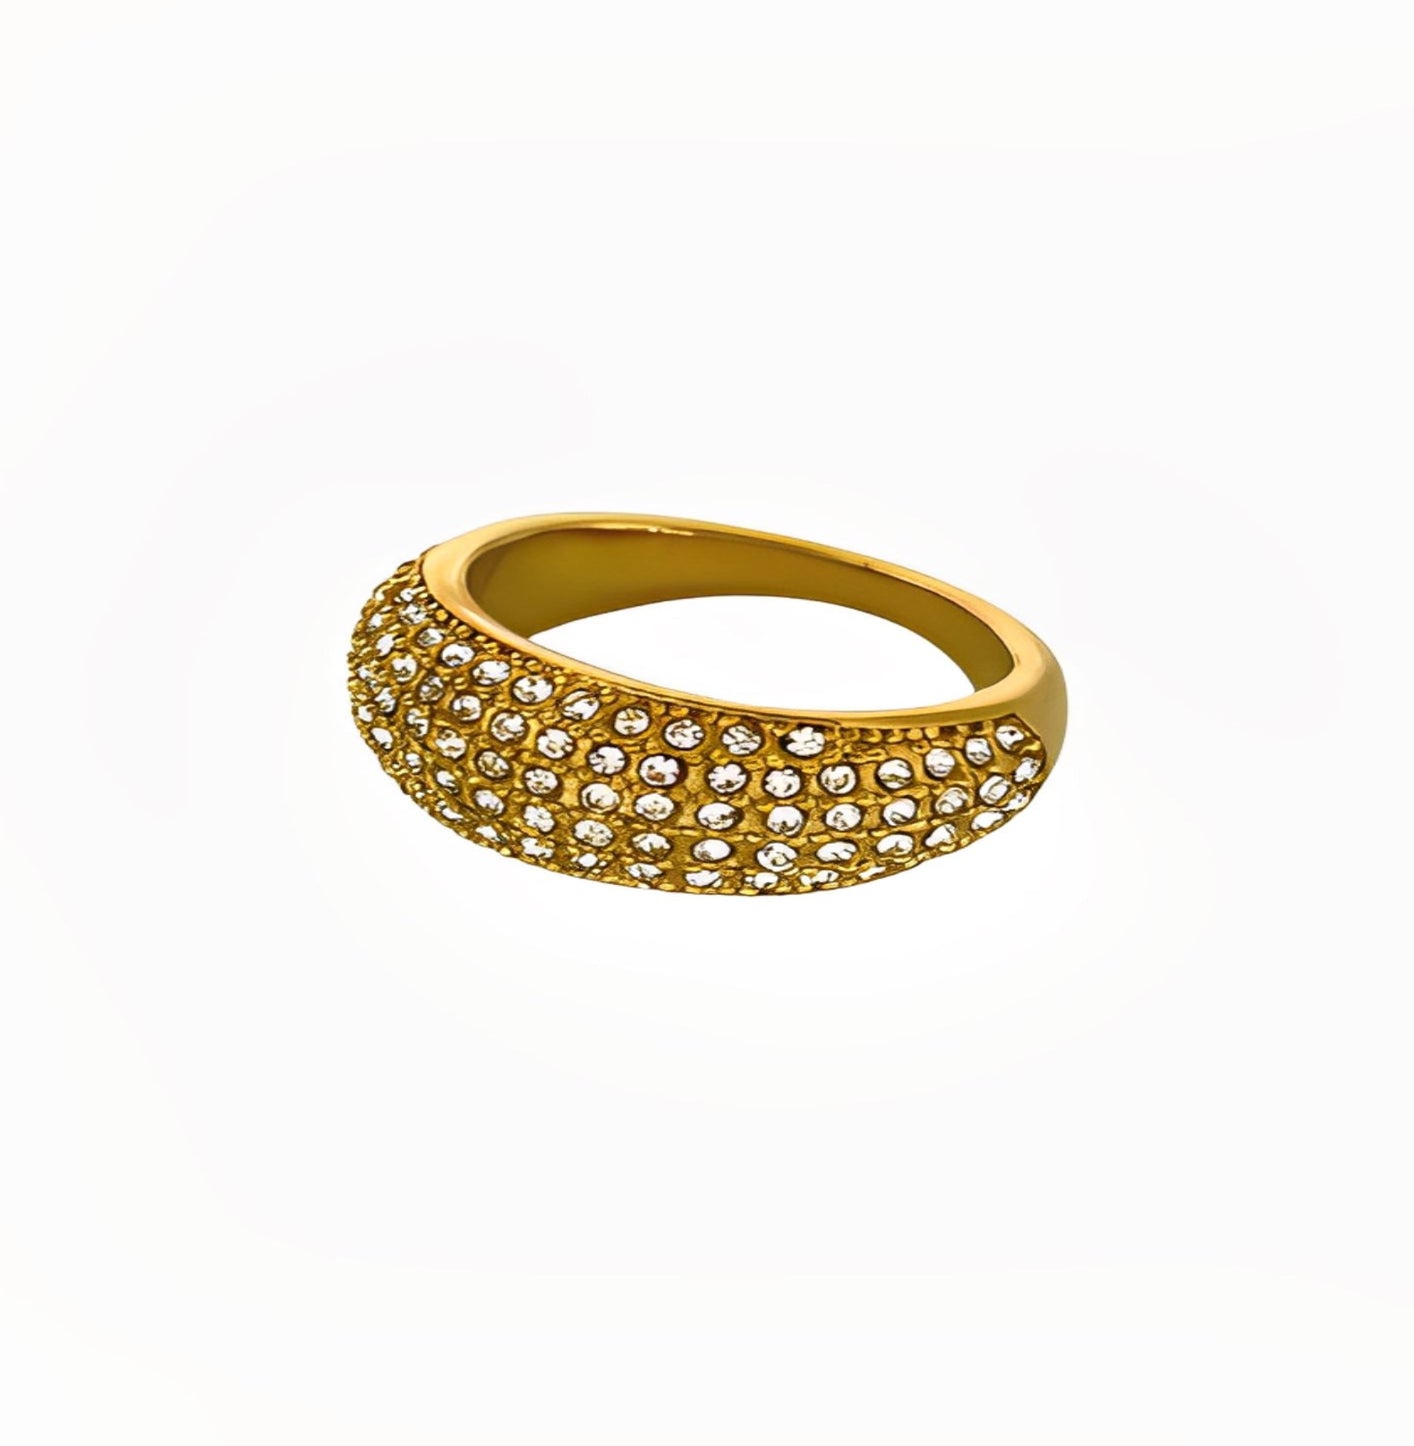 DIAMOND CIRCLE RING ring Yubama Jewelry Online Store - The Elegant Designs of Gold and Silver ! number 6 